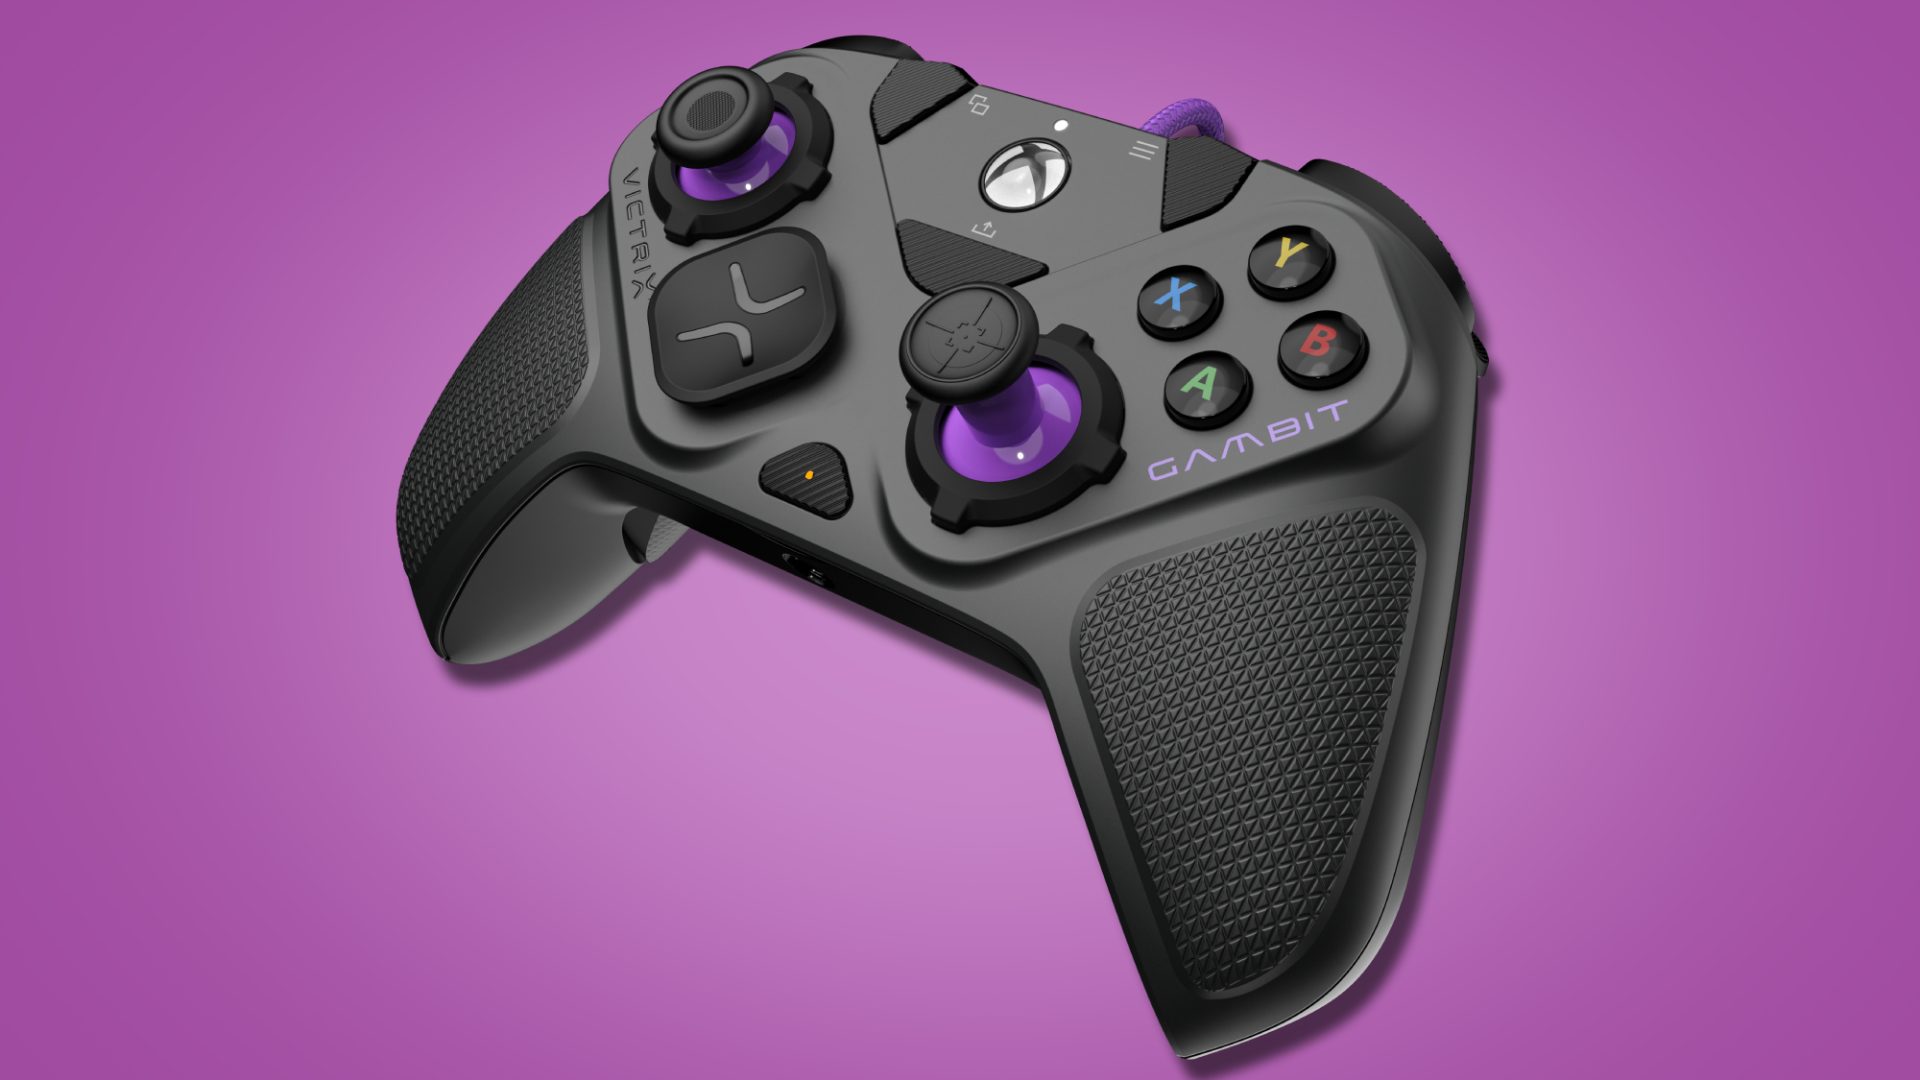 PDP’s new Victrix Gambit Prime controller takes on multiplayer with minimal input latency and a range of swappable modules